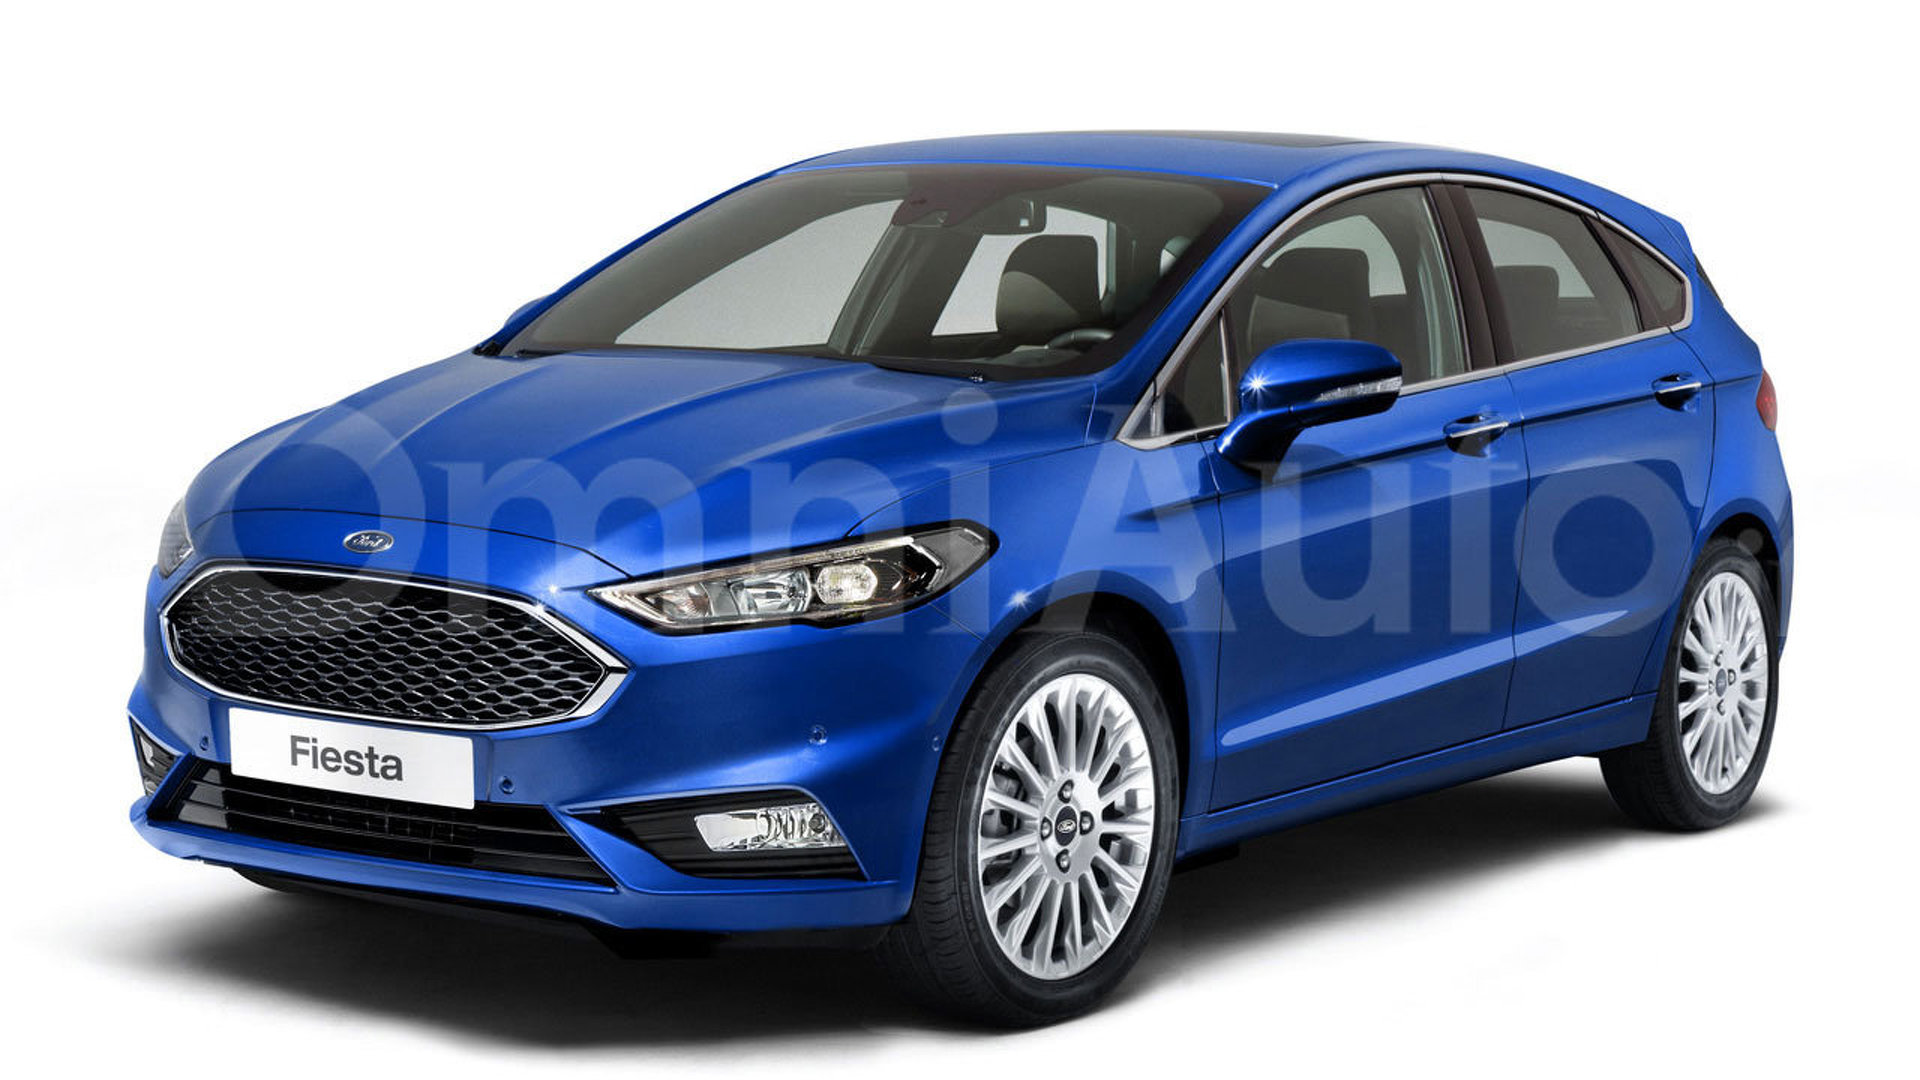 2017 Ford Fiesta envisioned with Focus cues Ford | Motor1.com